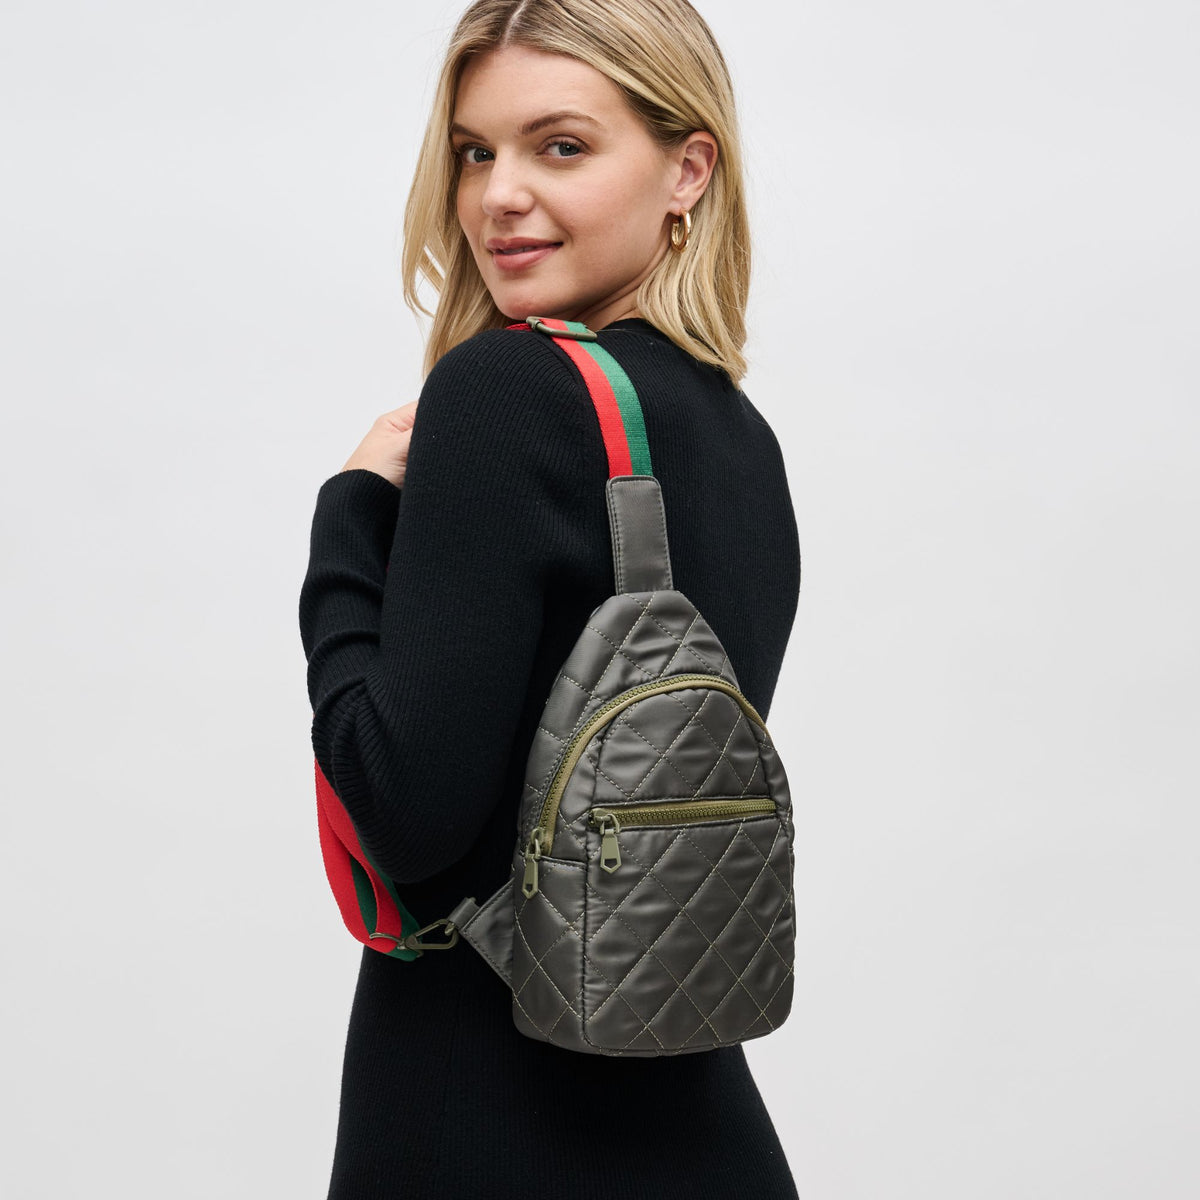 Woman wearing Olive Sol and Selene Motivator Sling Backpack 841764107921 View 1 | Olive